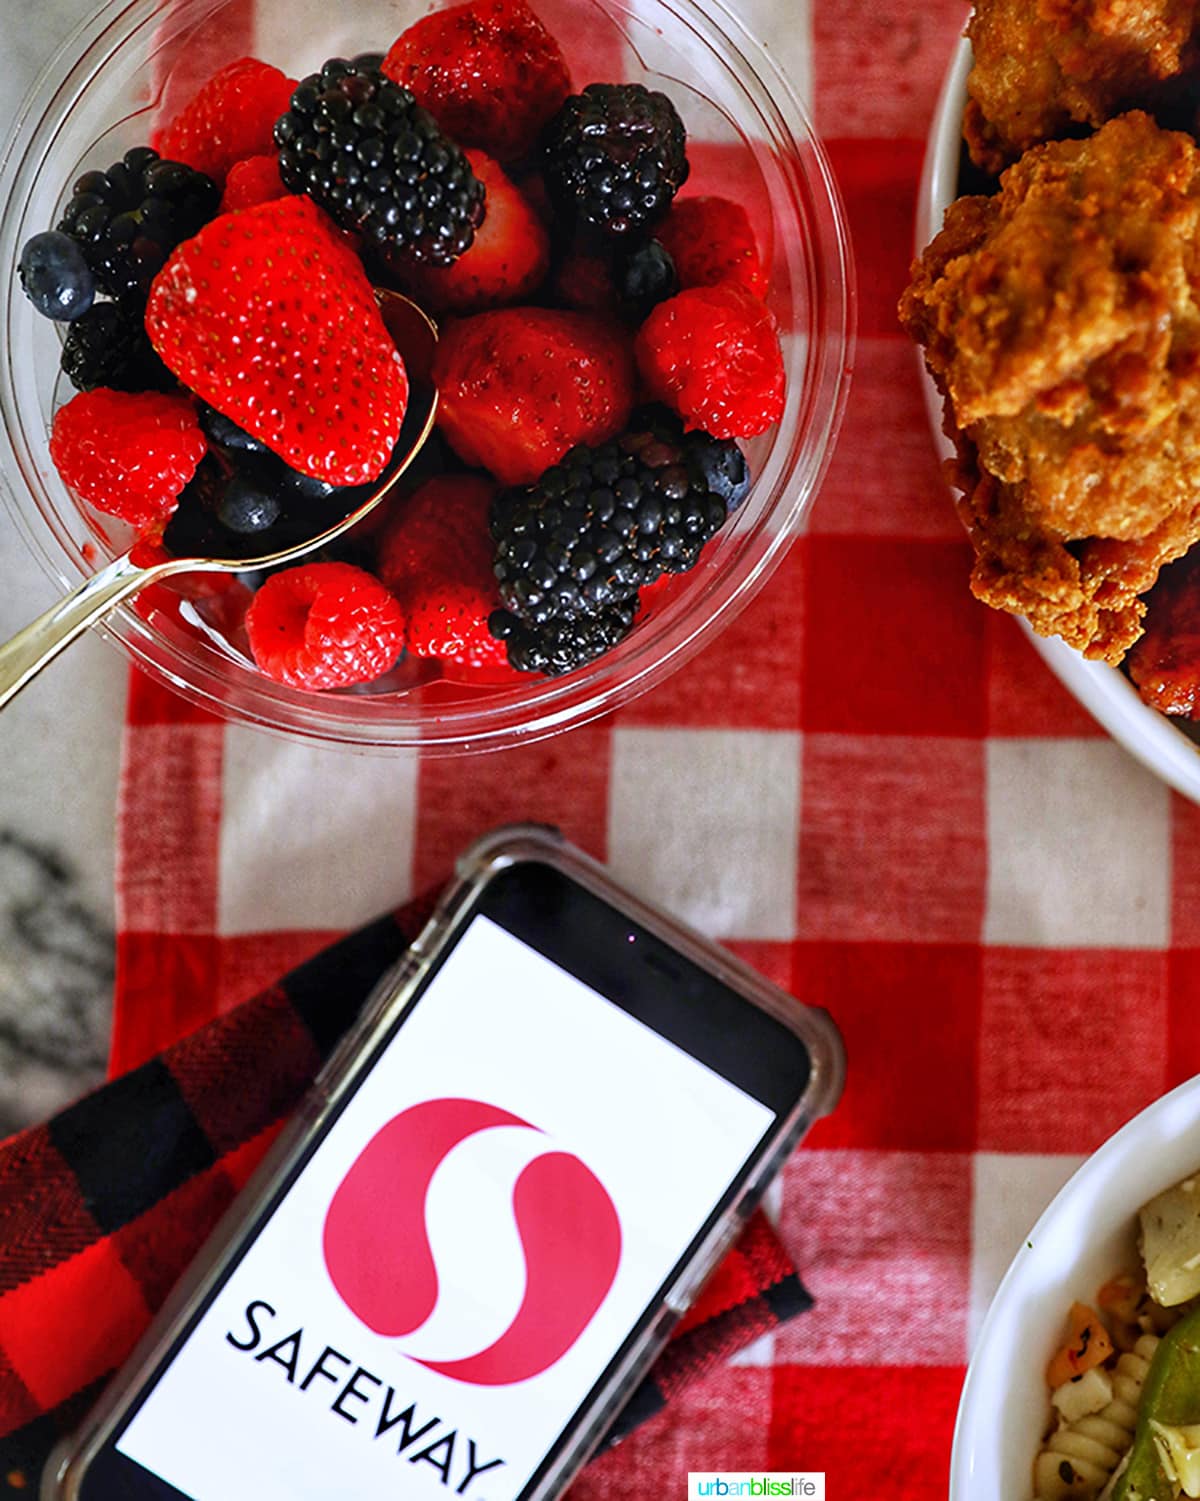 bowl of fruit with safeway logo on phone against red and white checkered tablecloth